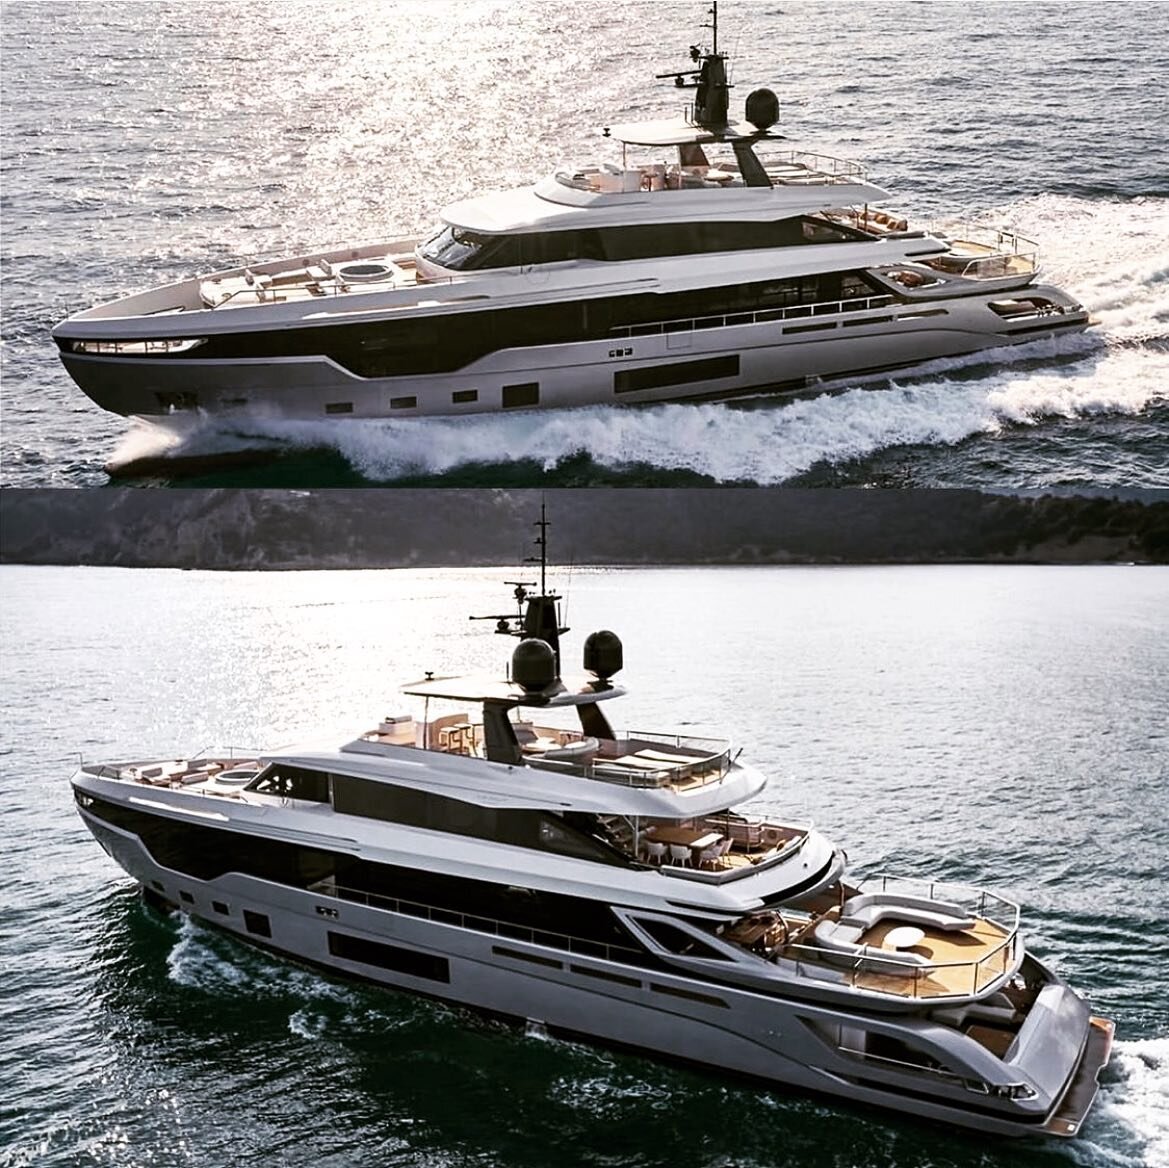 &ldquo;With the unique raised mezzanine deck, Azimut adds to and redefines outdoor living on a yacht,&rdquo; WINNER of 2022 Miami Innovation Awards.  Innovative design solutions, The Sea View terrace is the principle of &ldquo;+ One&rdquo;, a new des